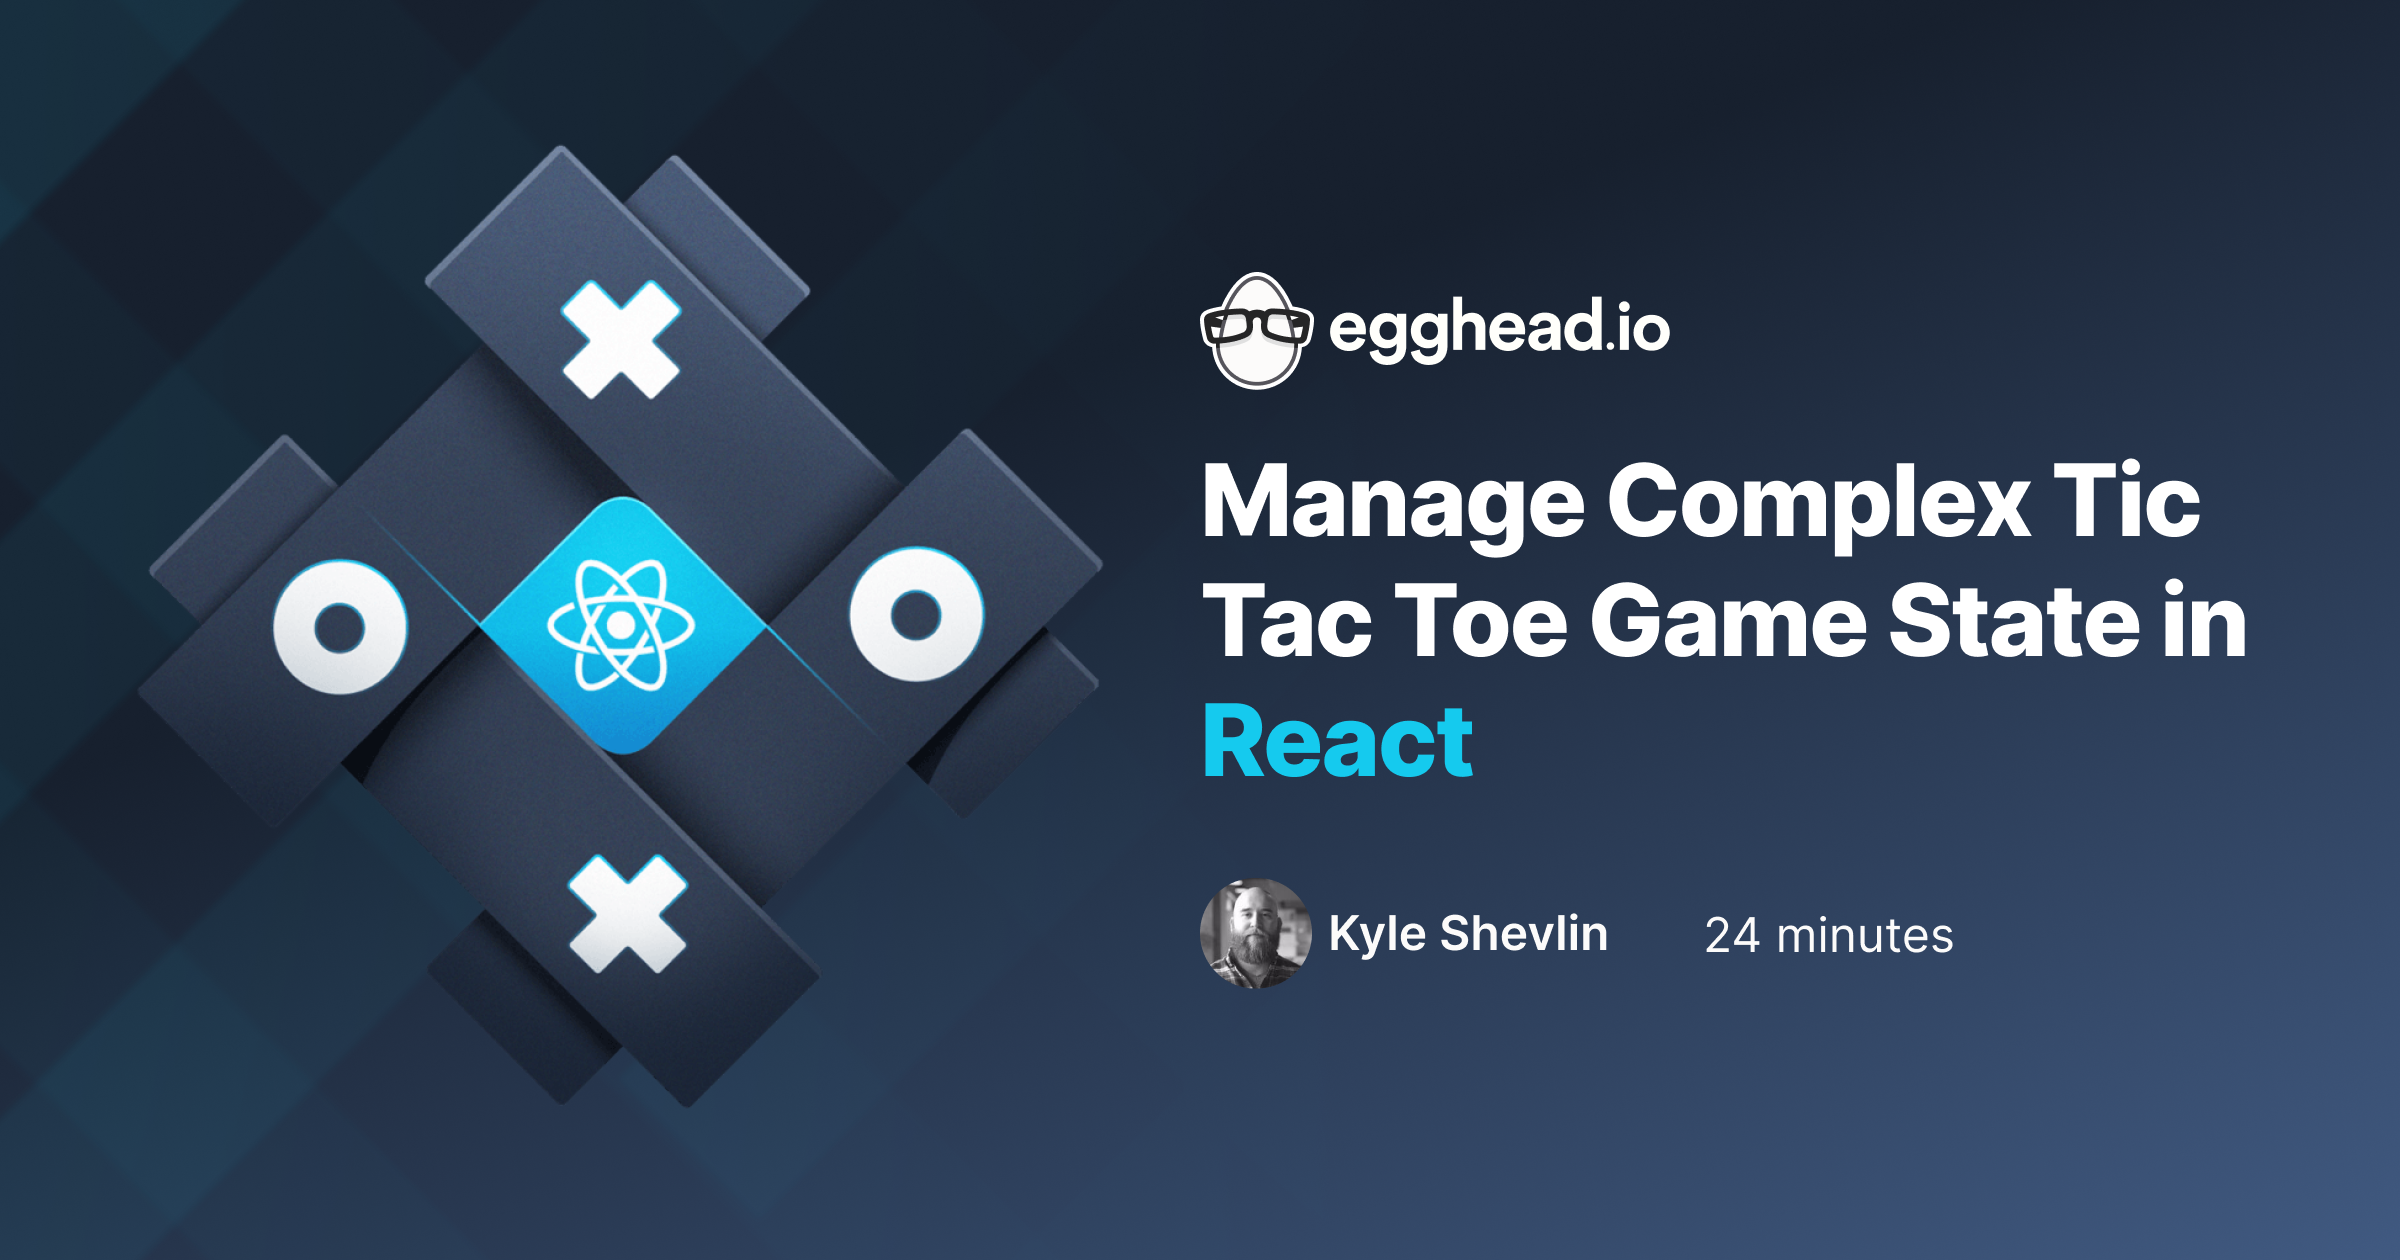 Learn How to Build Tic-Tac-Toe with React Hooks